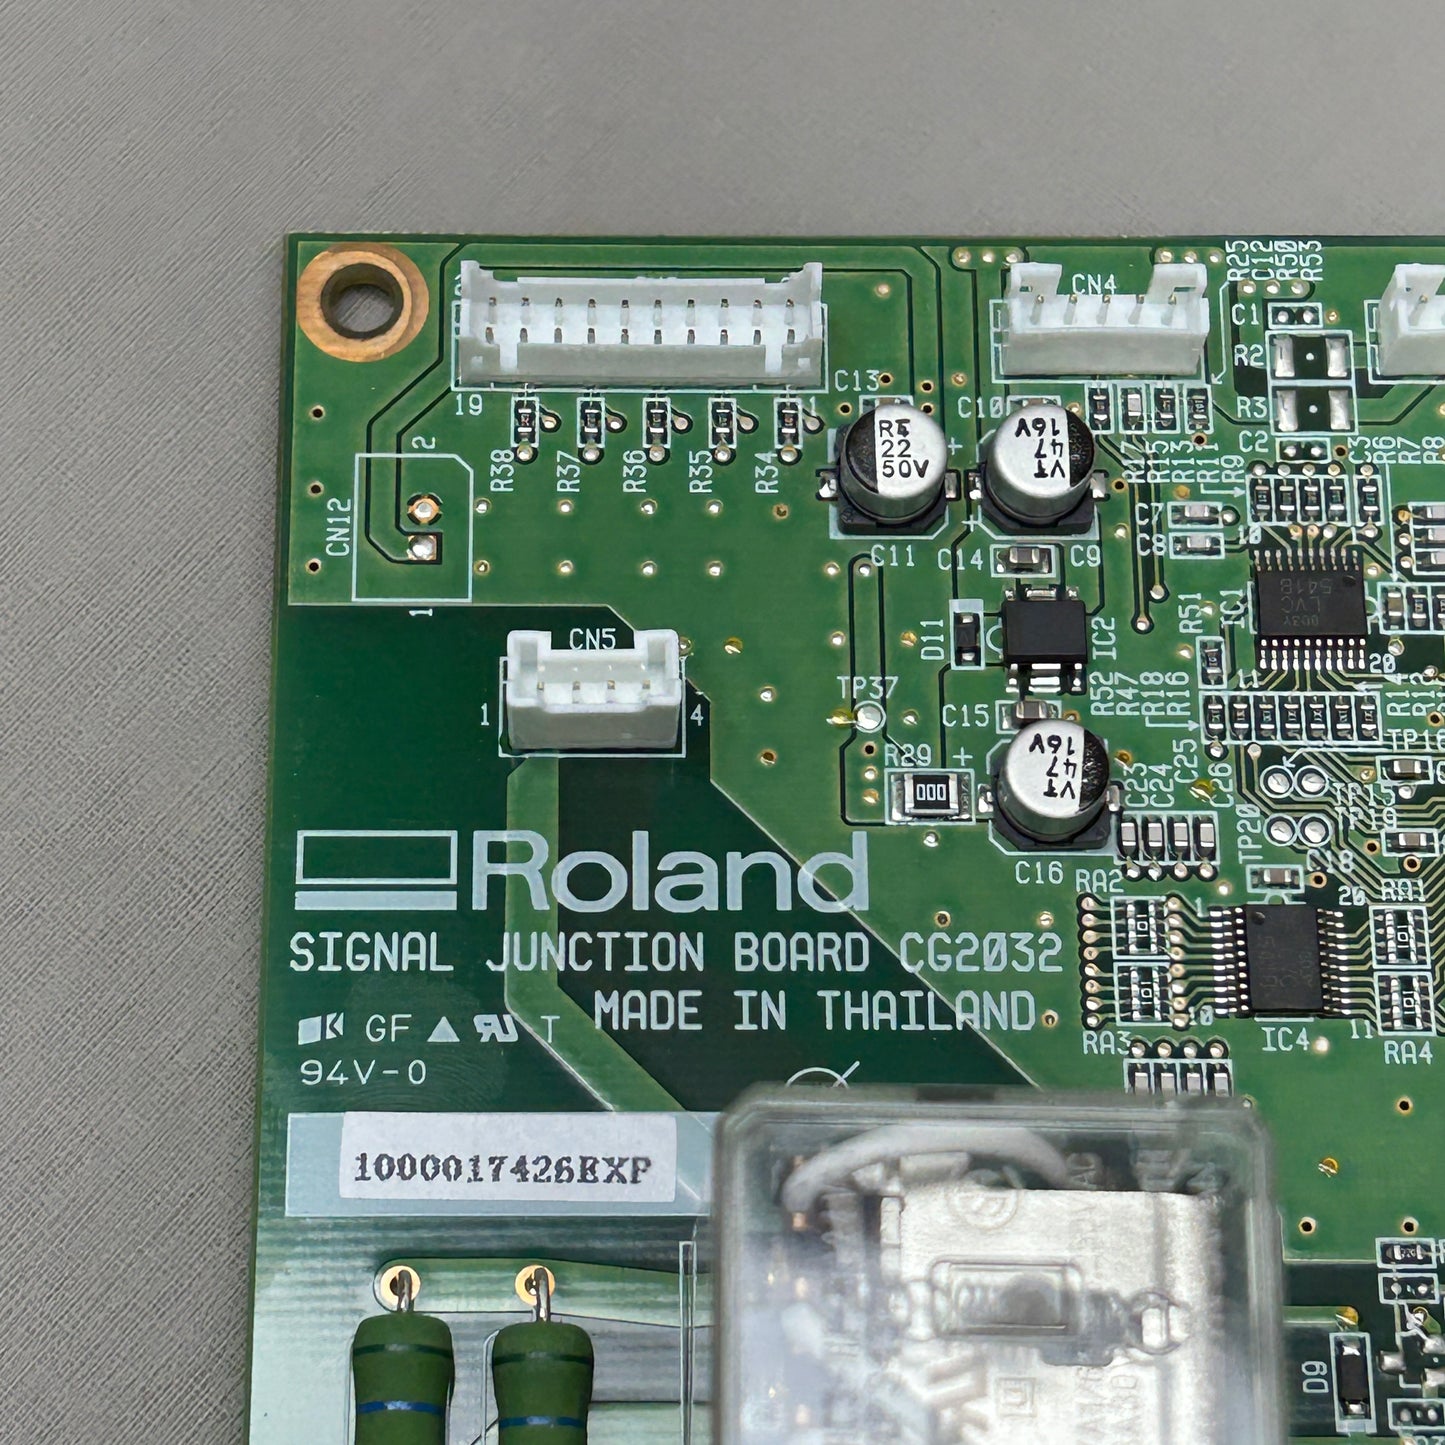 ROLAND ASSY Signal Junction Board CG2032 1000017426 (New)